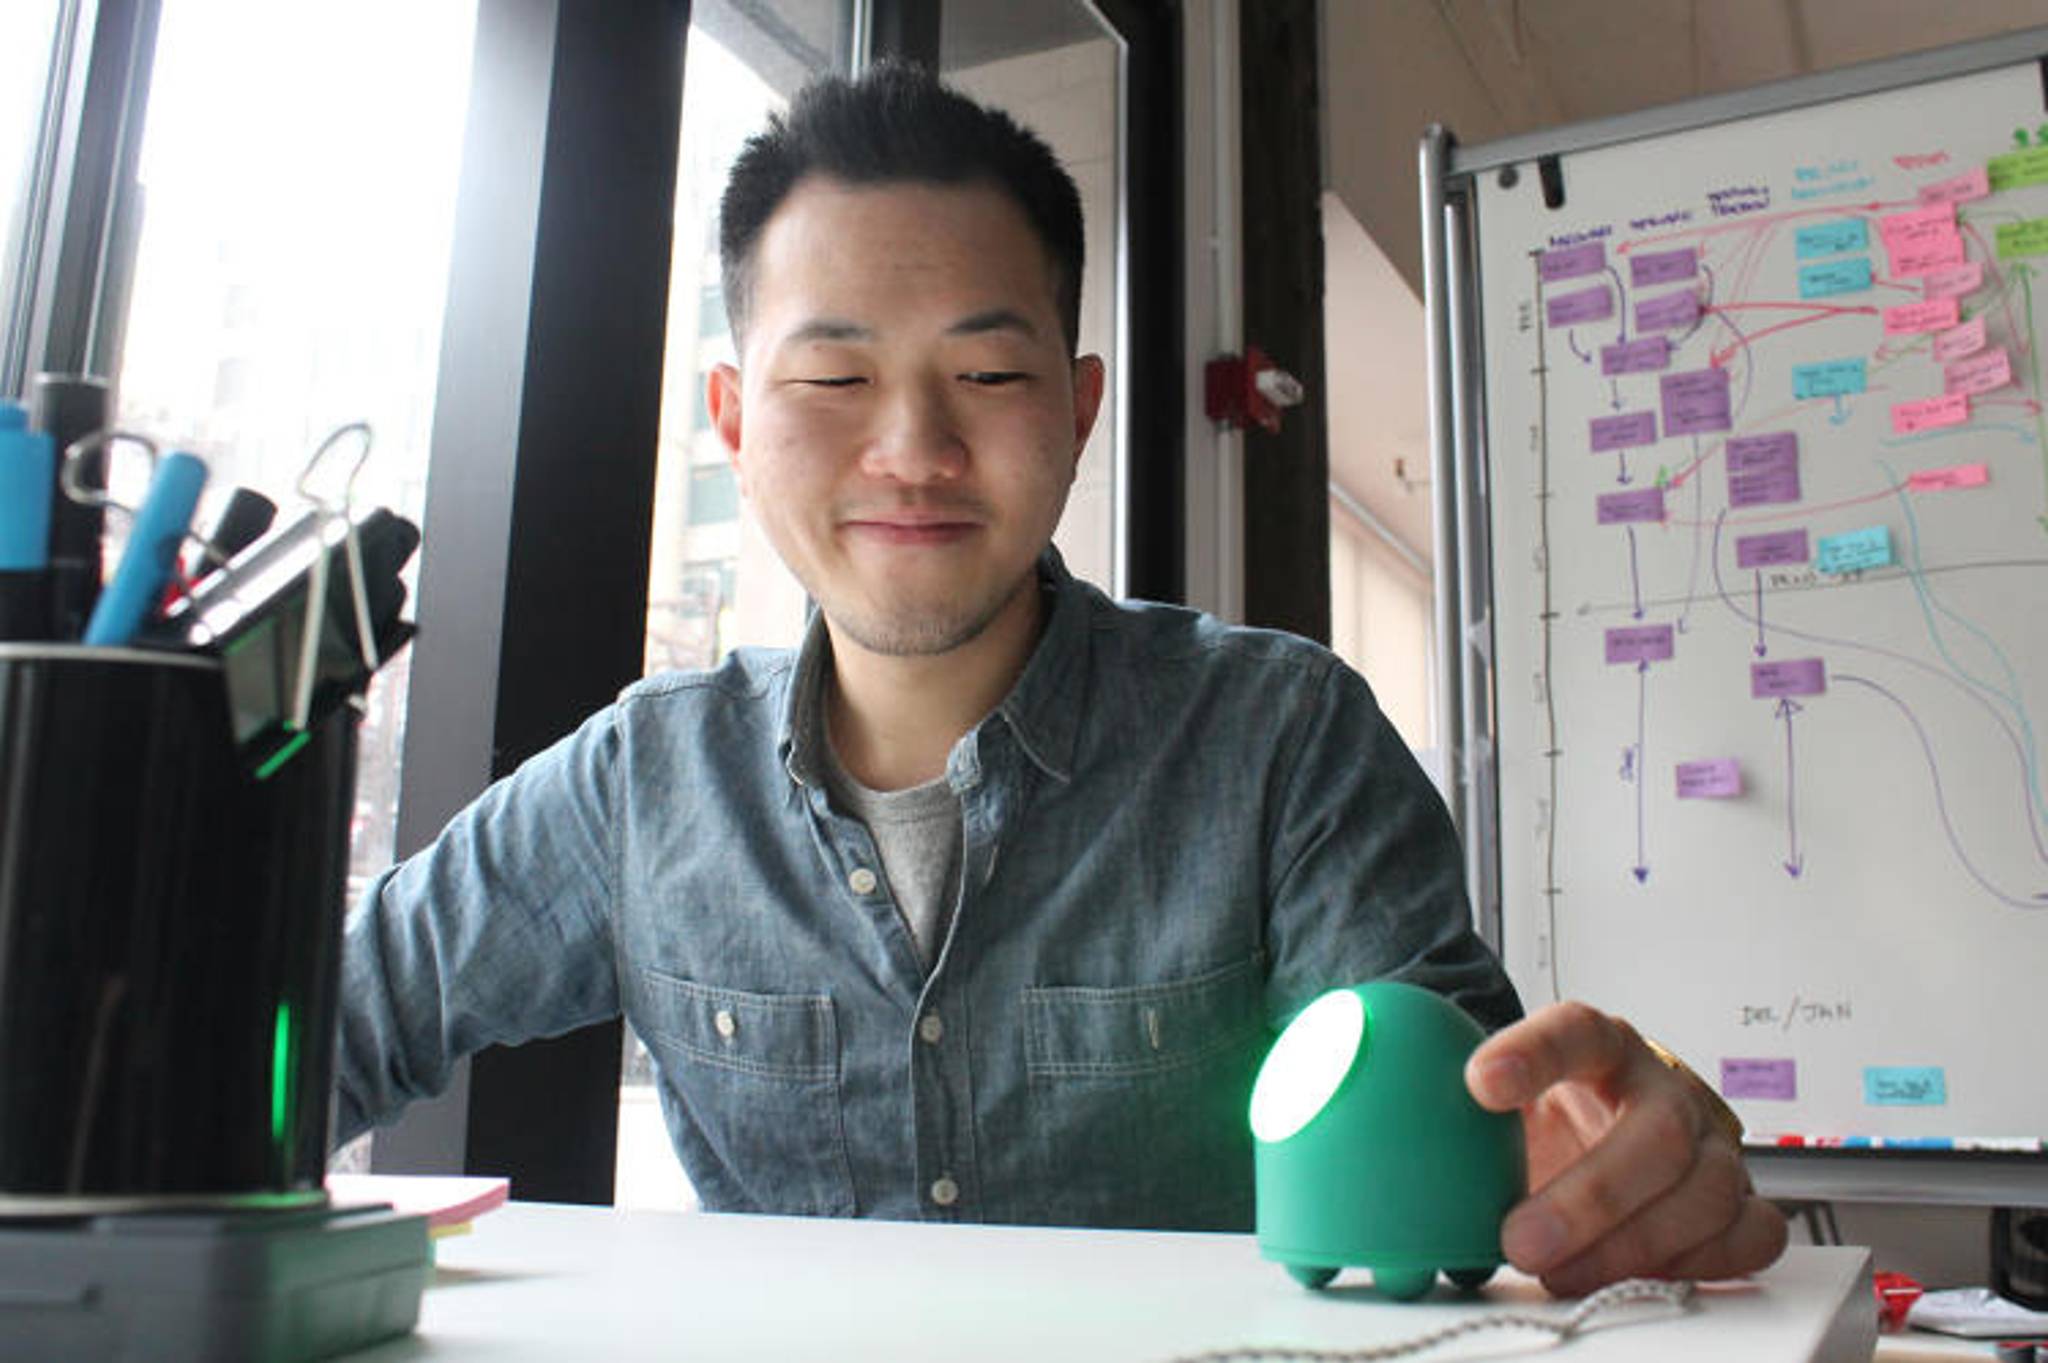 This cute robot will make you a better person